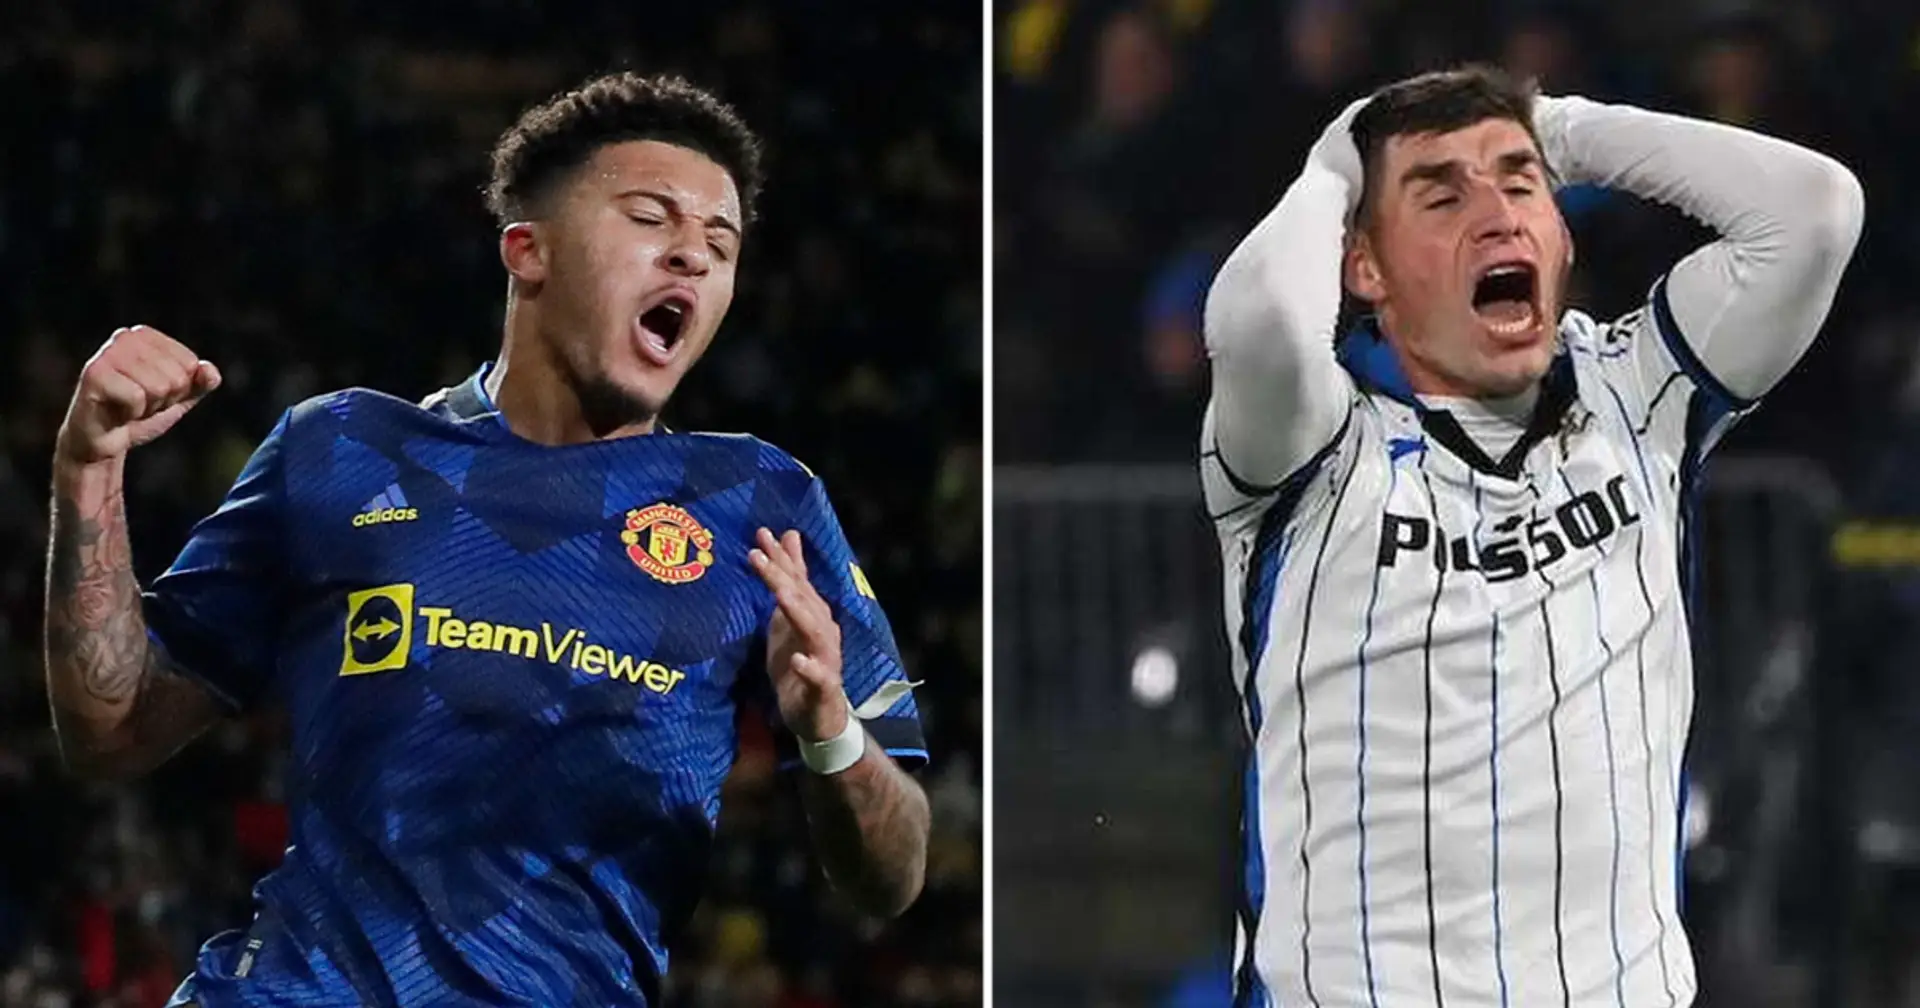 United secure top place in Champions League Group F after Atalanta drop points vs Young Boys